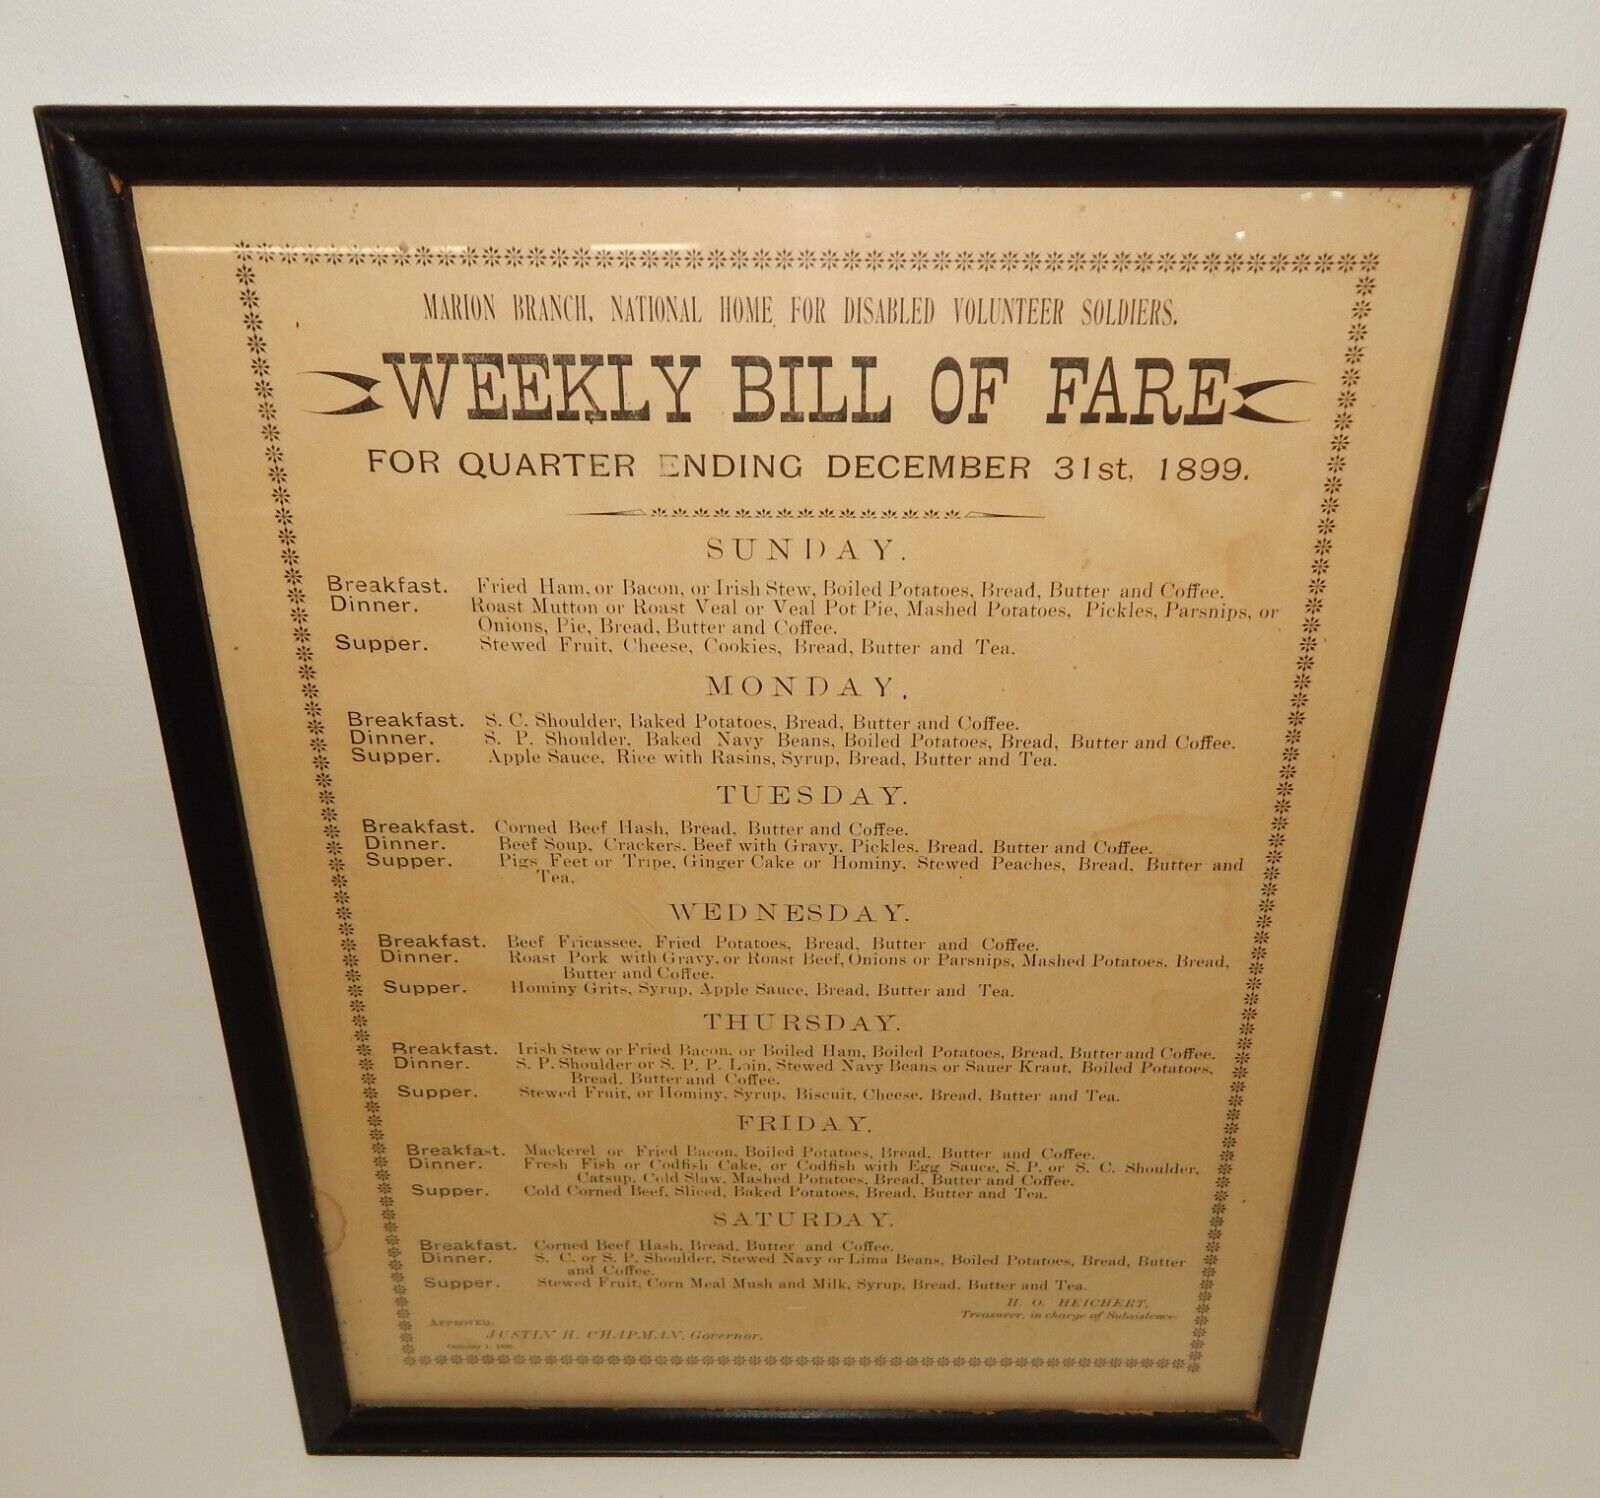 Antique 1899 Disabled Volunteer Soldiers Home Weekly Bill of Fare - Framed